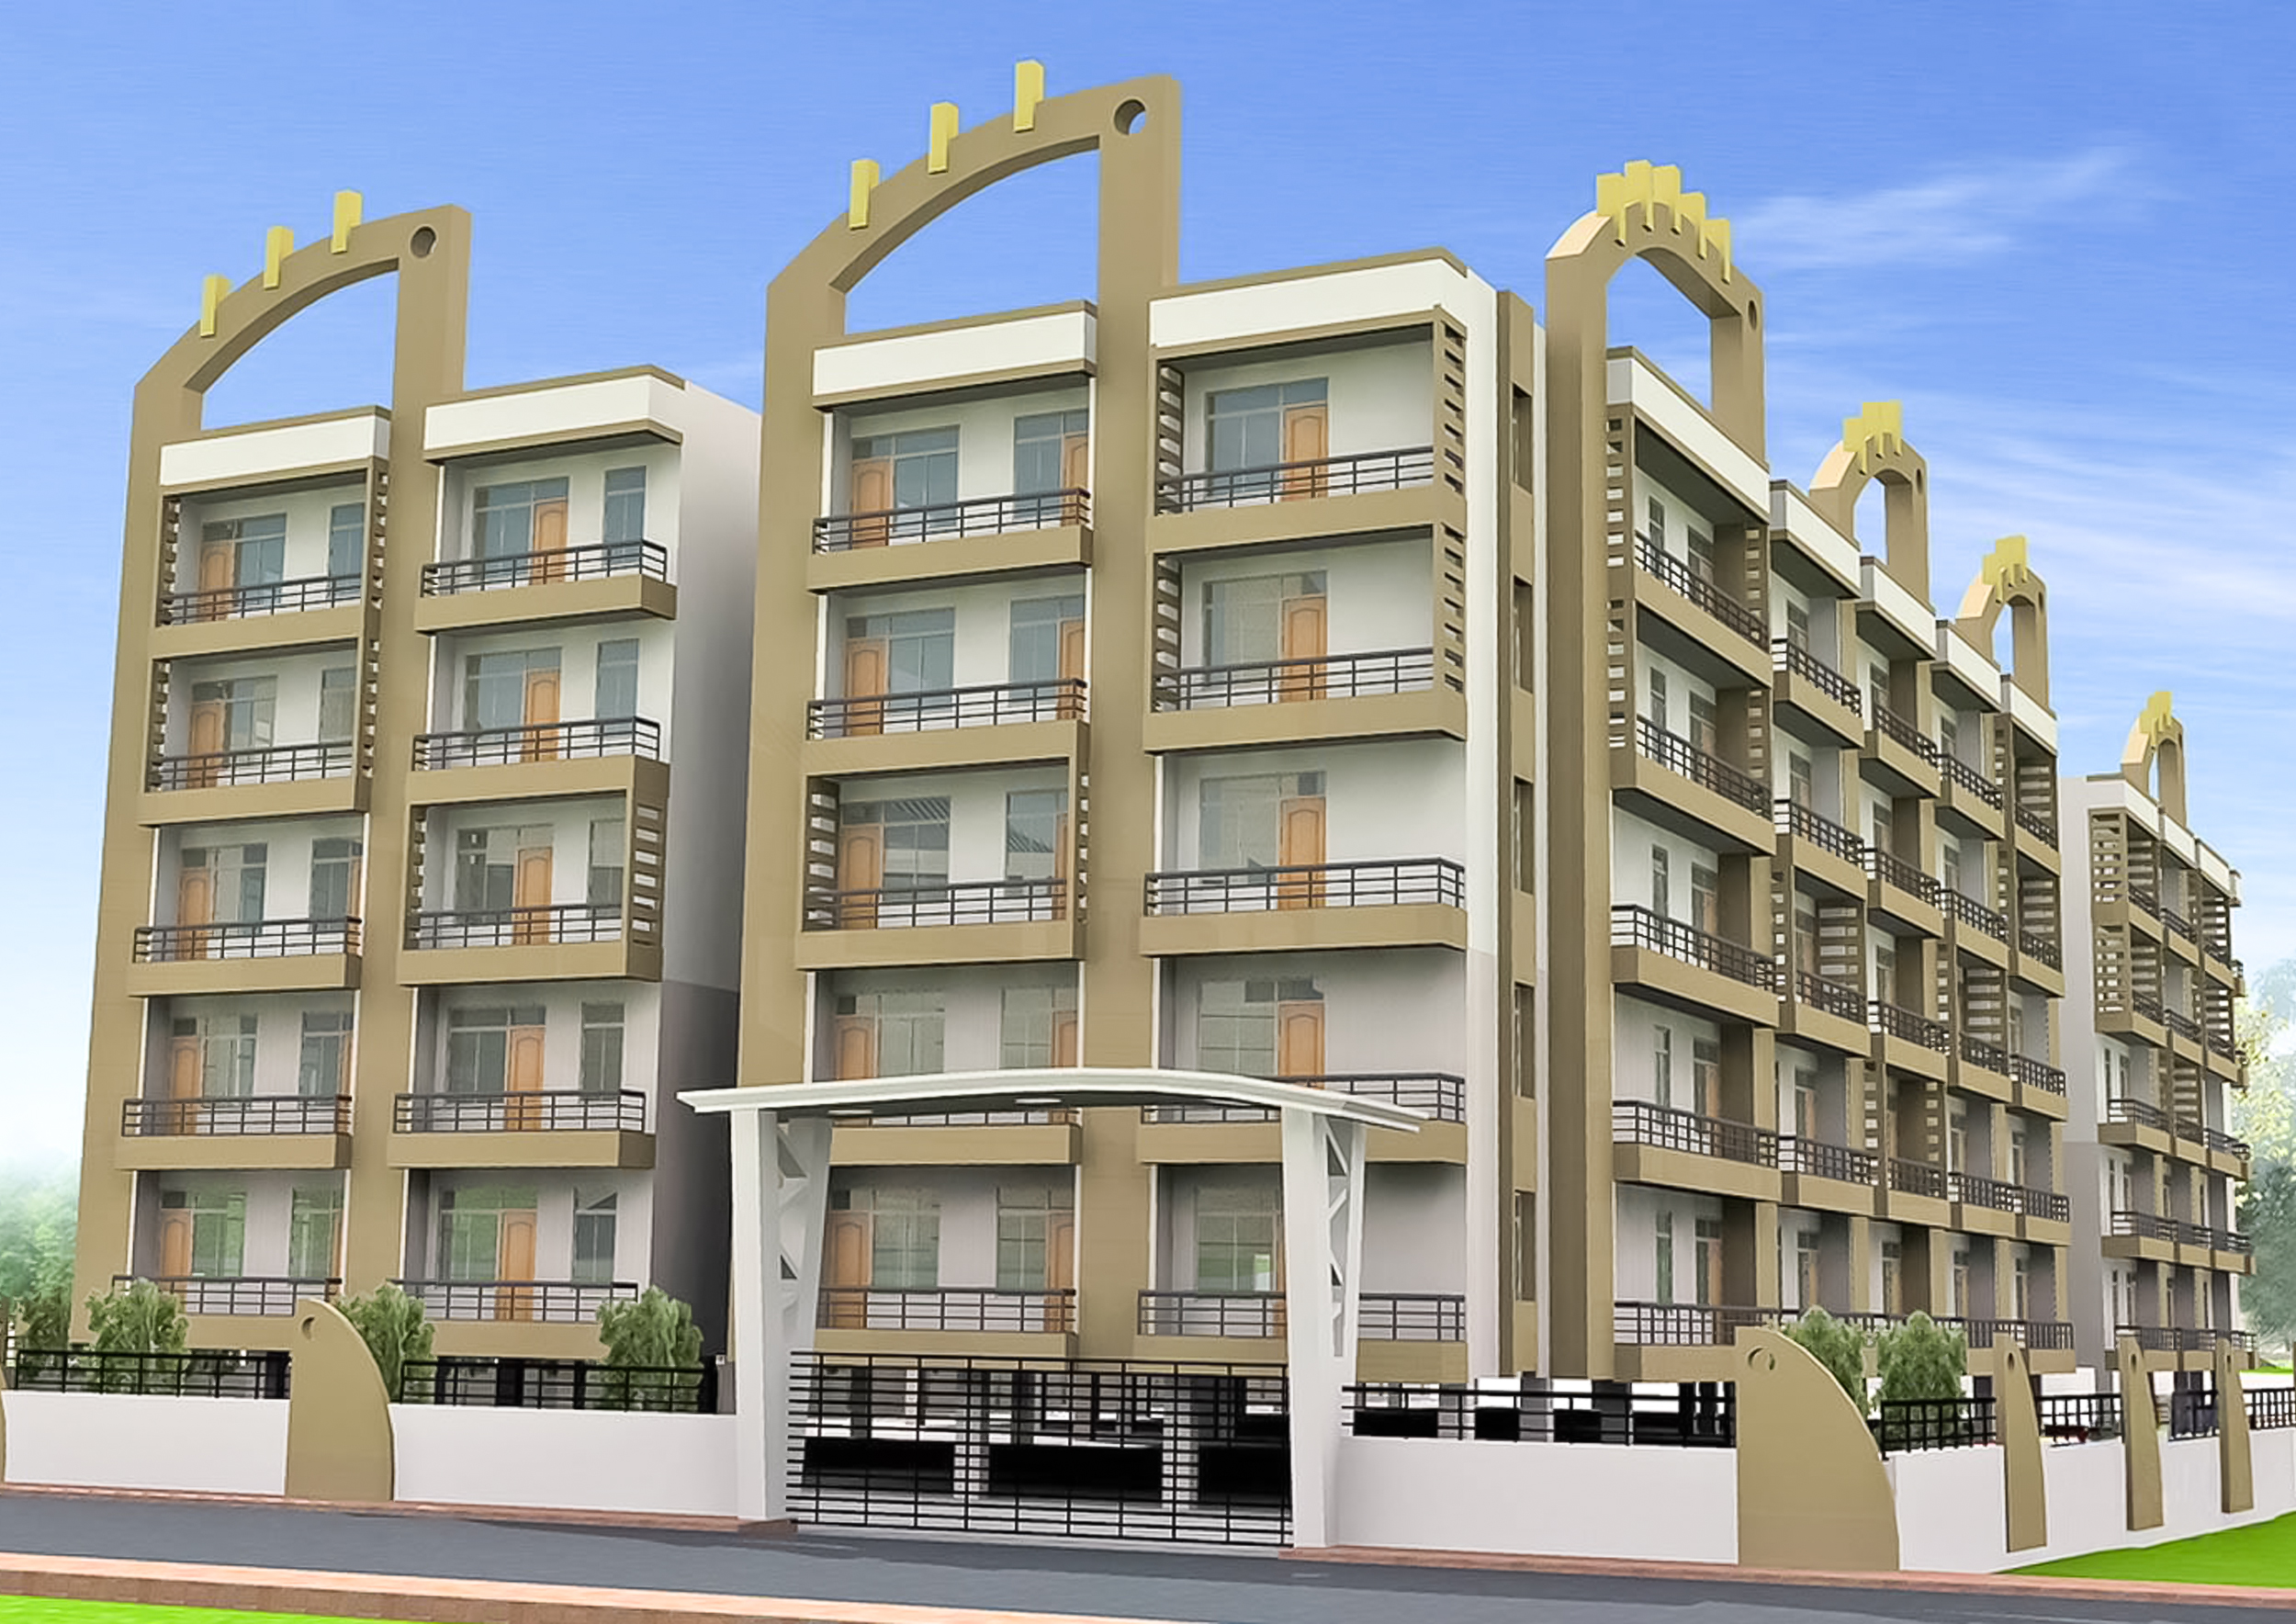 Property In Varanasi: Commercial and Residential Property For Sale In Varanasi